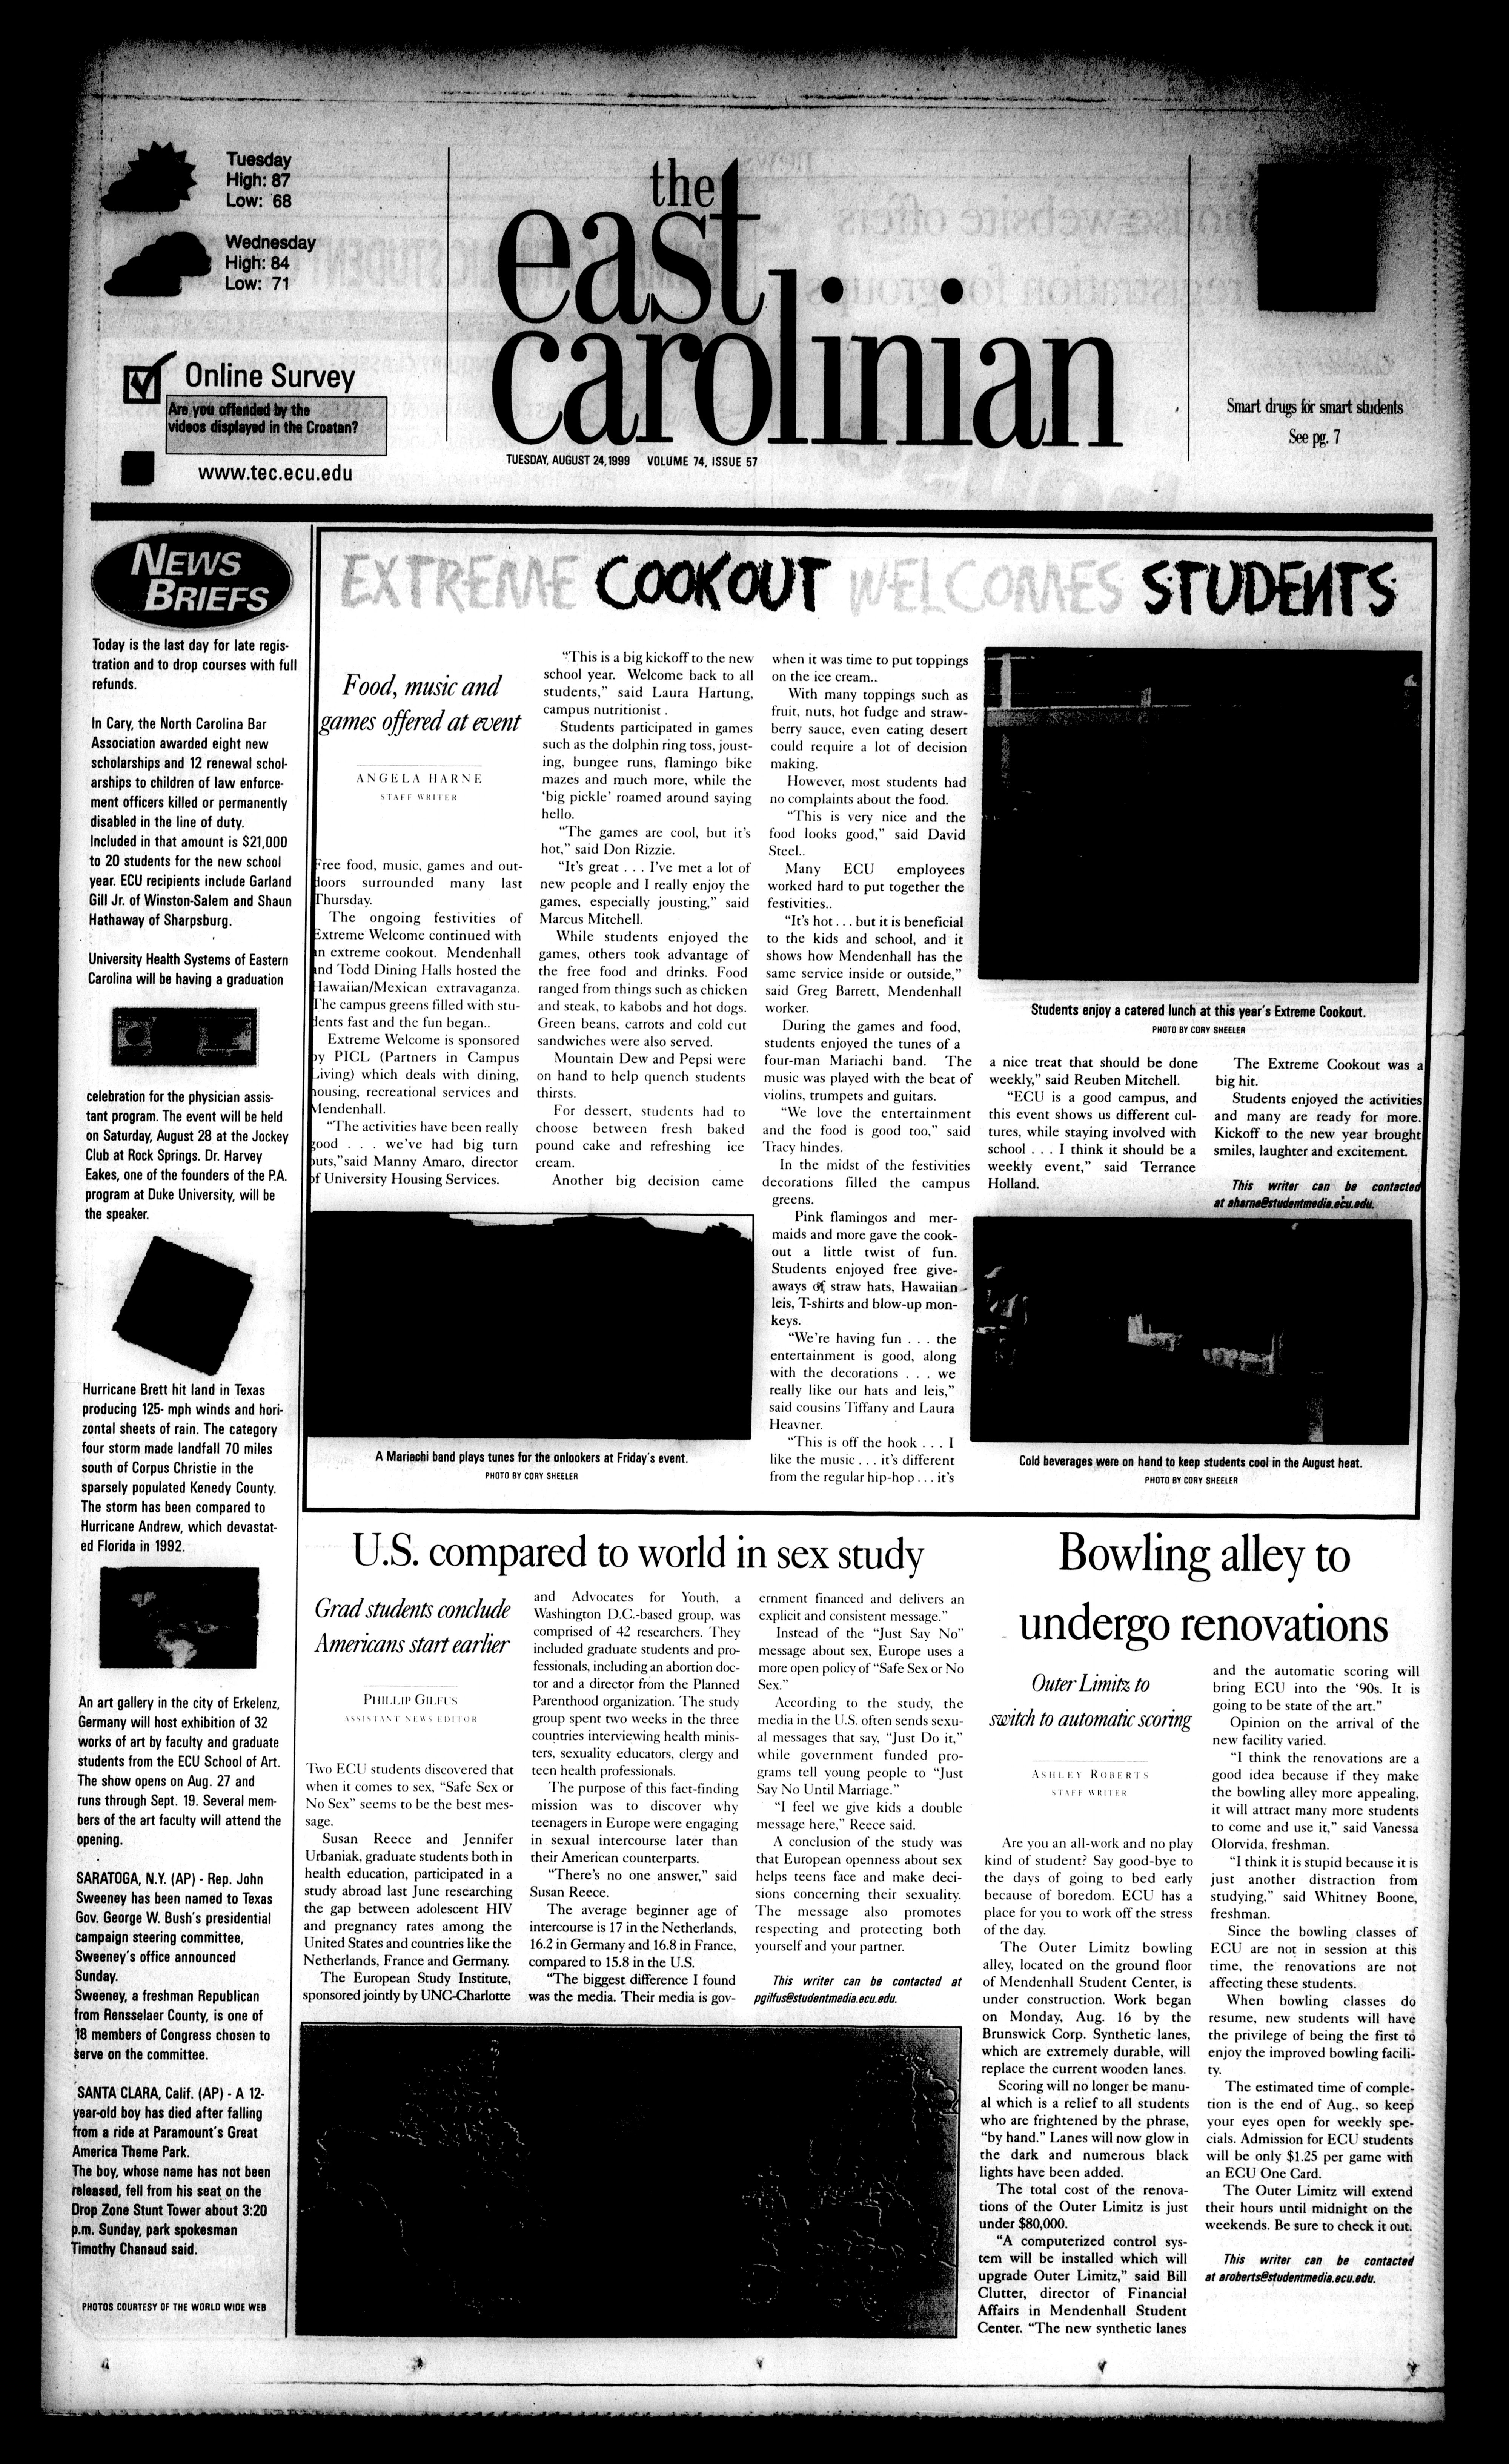 The East Carolinian, August 24, 1999 pic